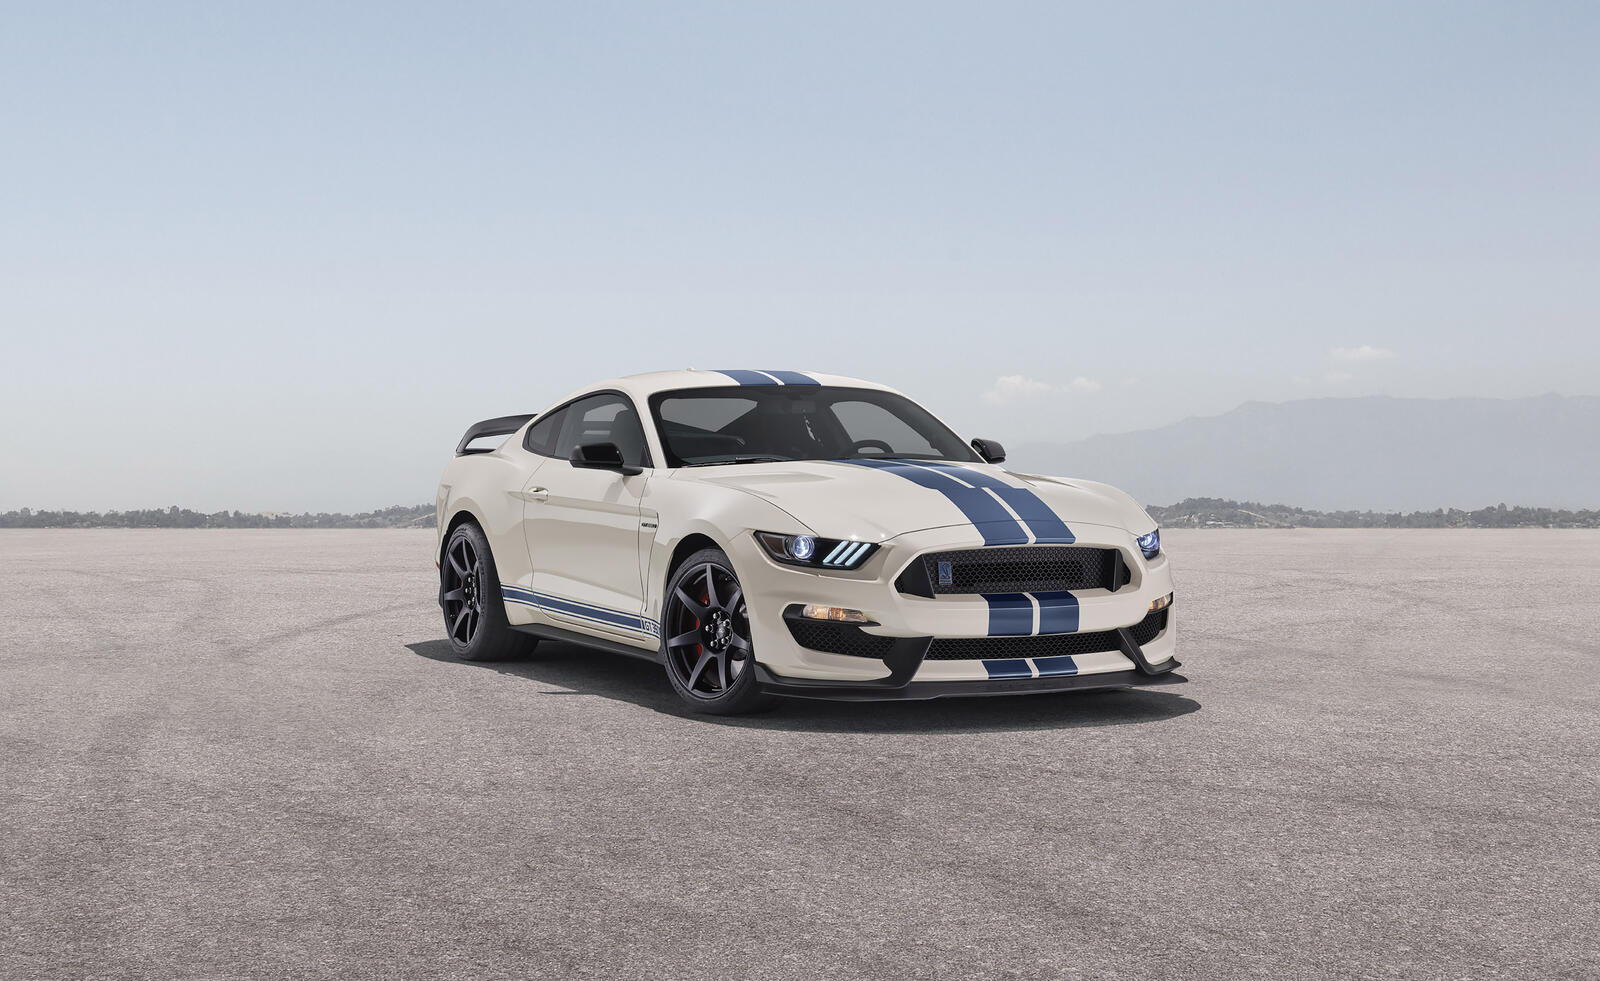 Free photo White 2019 Ford Mustang with blue stripes